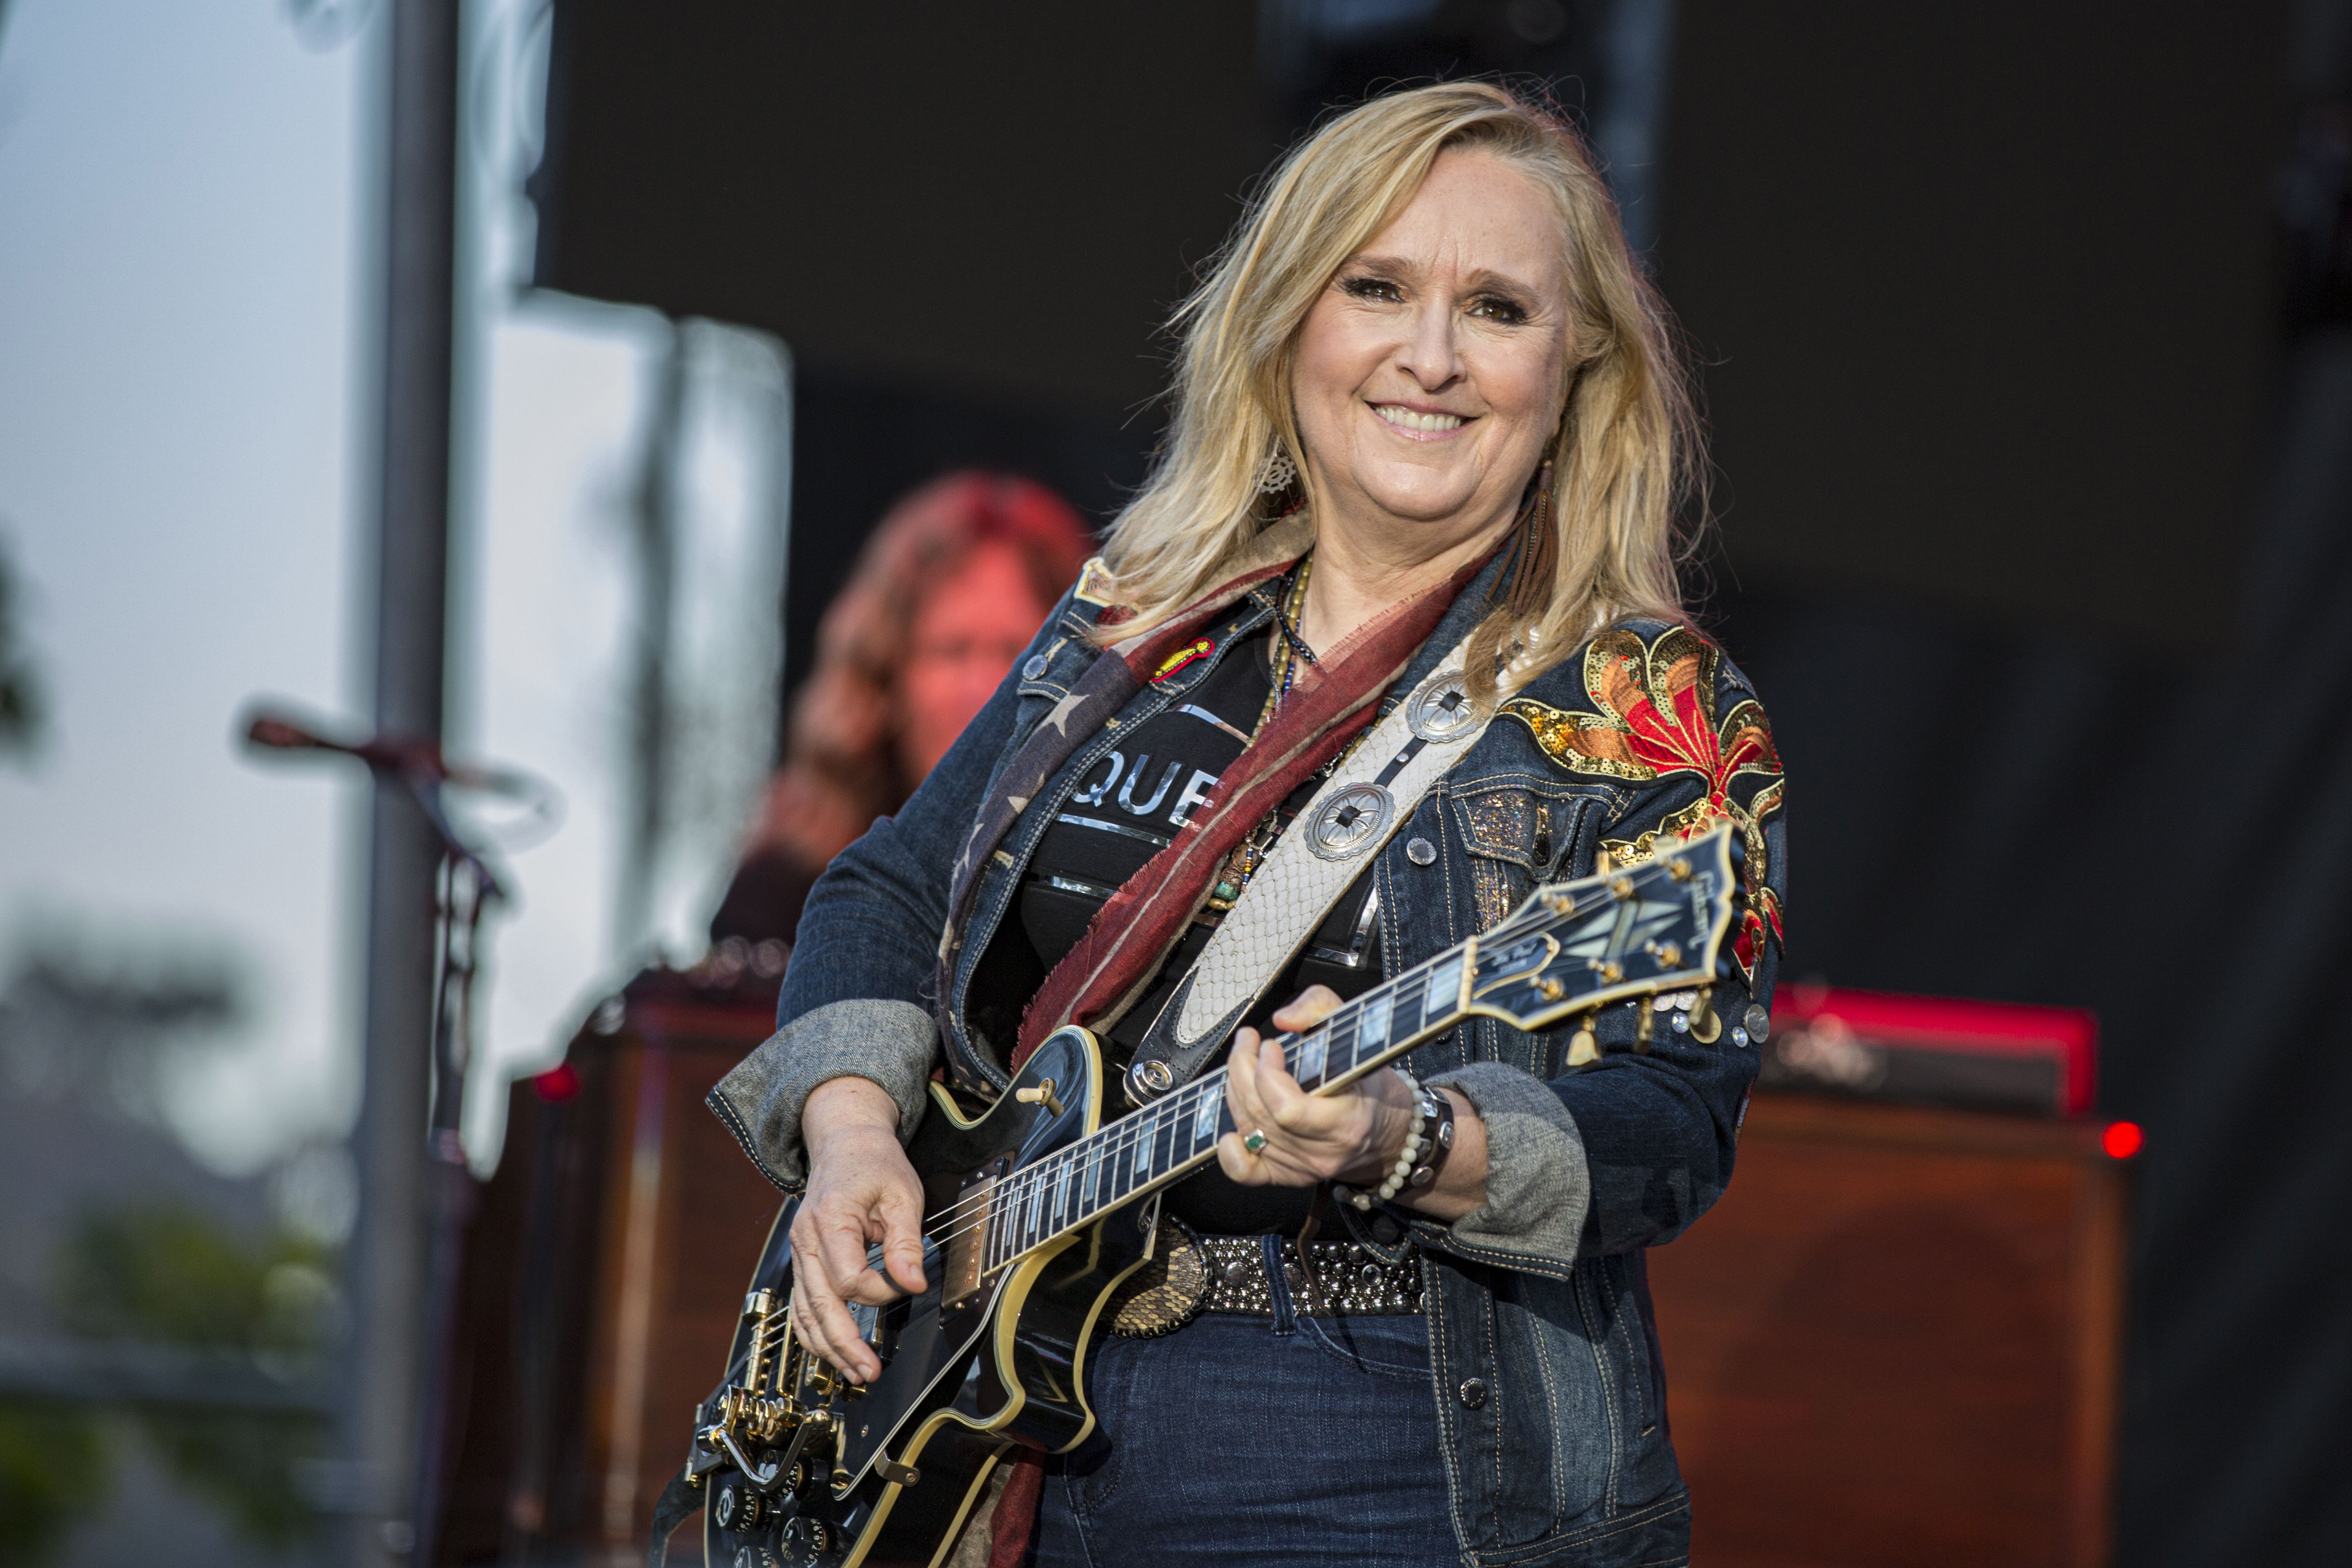 Melissa Etheridge performs on stage at San Diego Pride Festival 2019 on July 14, 2019. | Photo: Getty Images